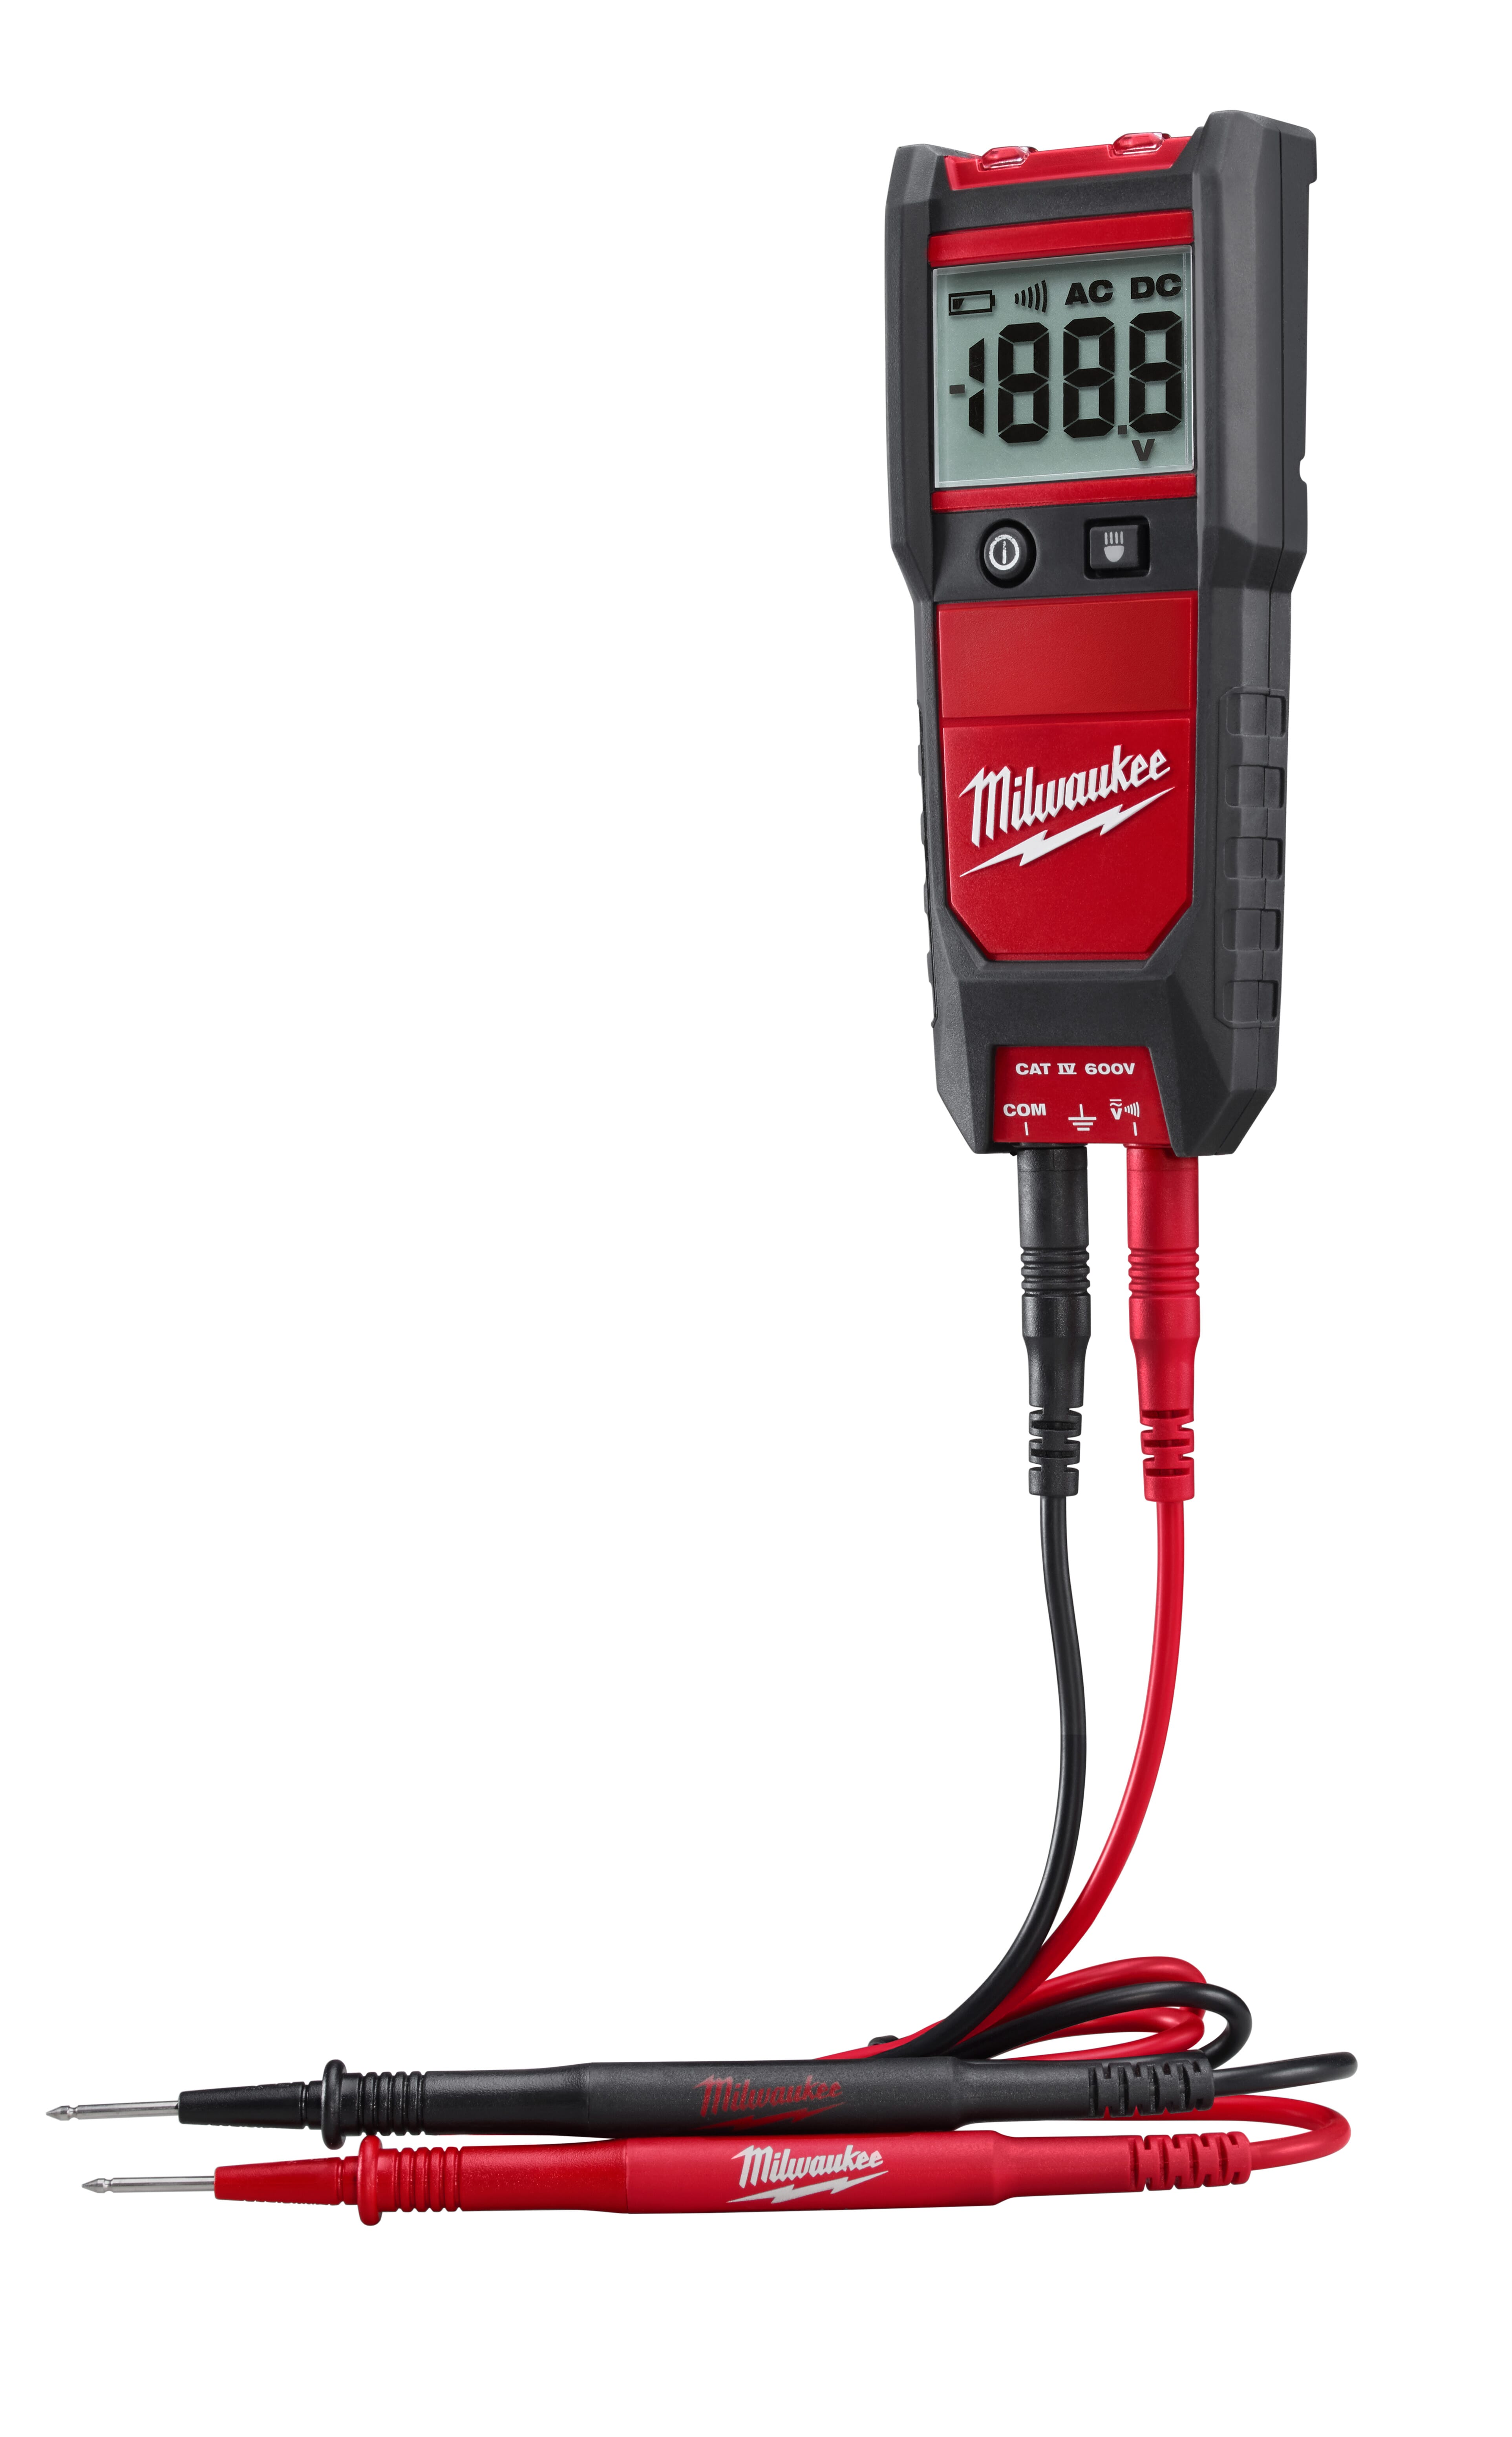 Milwaukee® 2212-20 Auto-Function Auto Voltage/Continuity Tester, 600 VAC/VDC, +/-3% + 5 Digits Accuracy, LCD Display